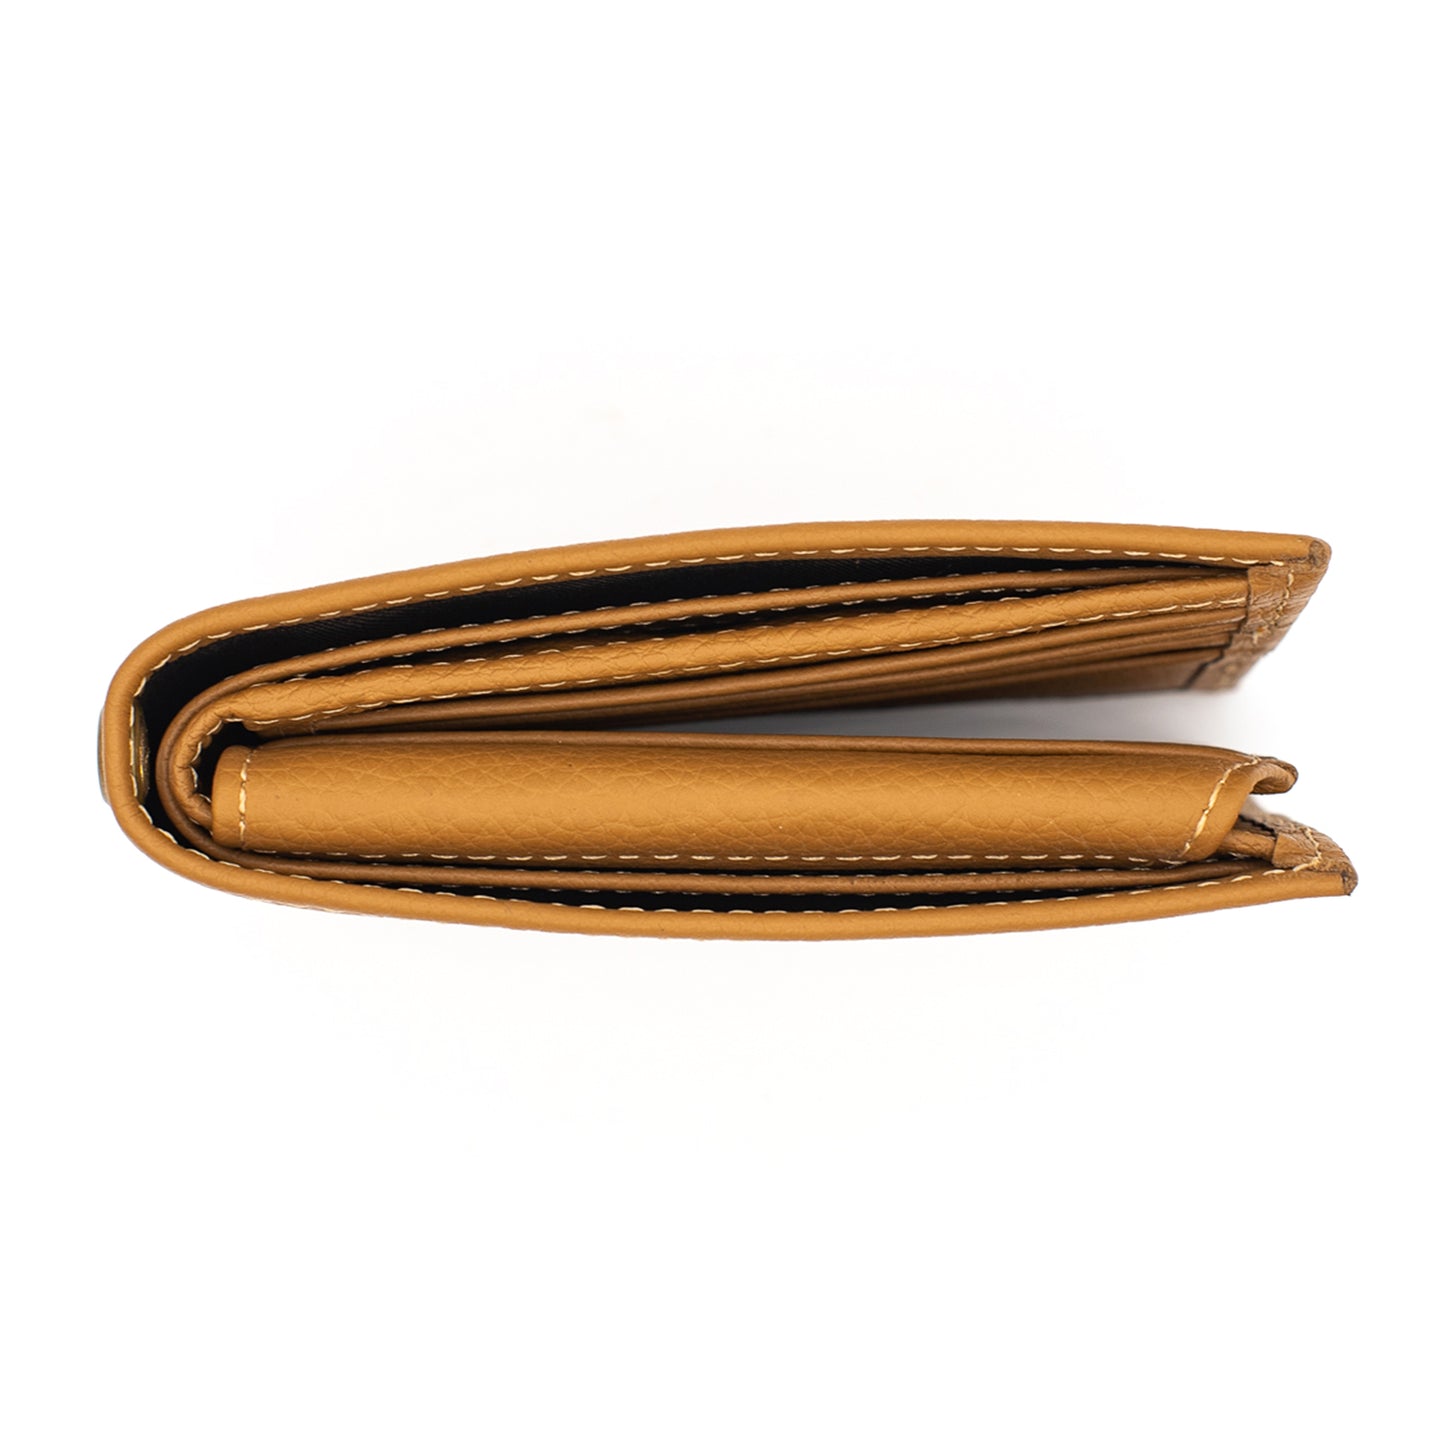 Slim Leather Bifold Wallet | Top-Grain Leather Made